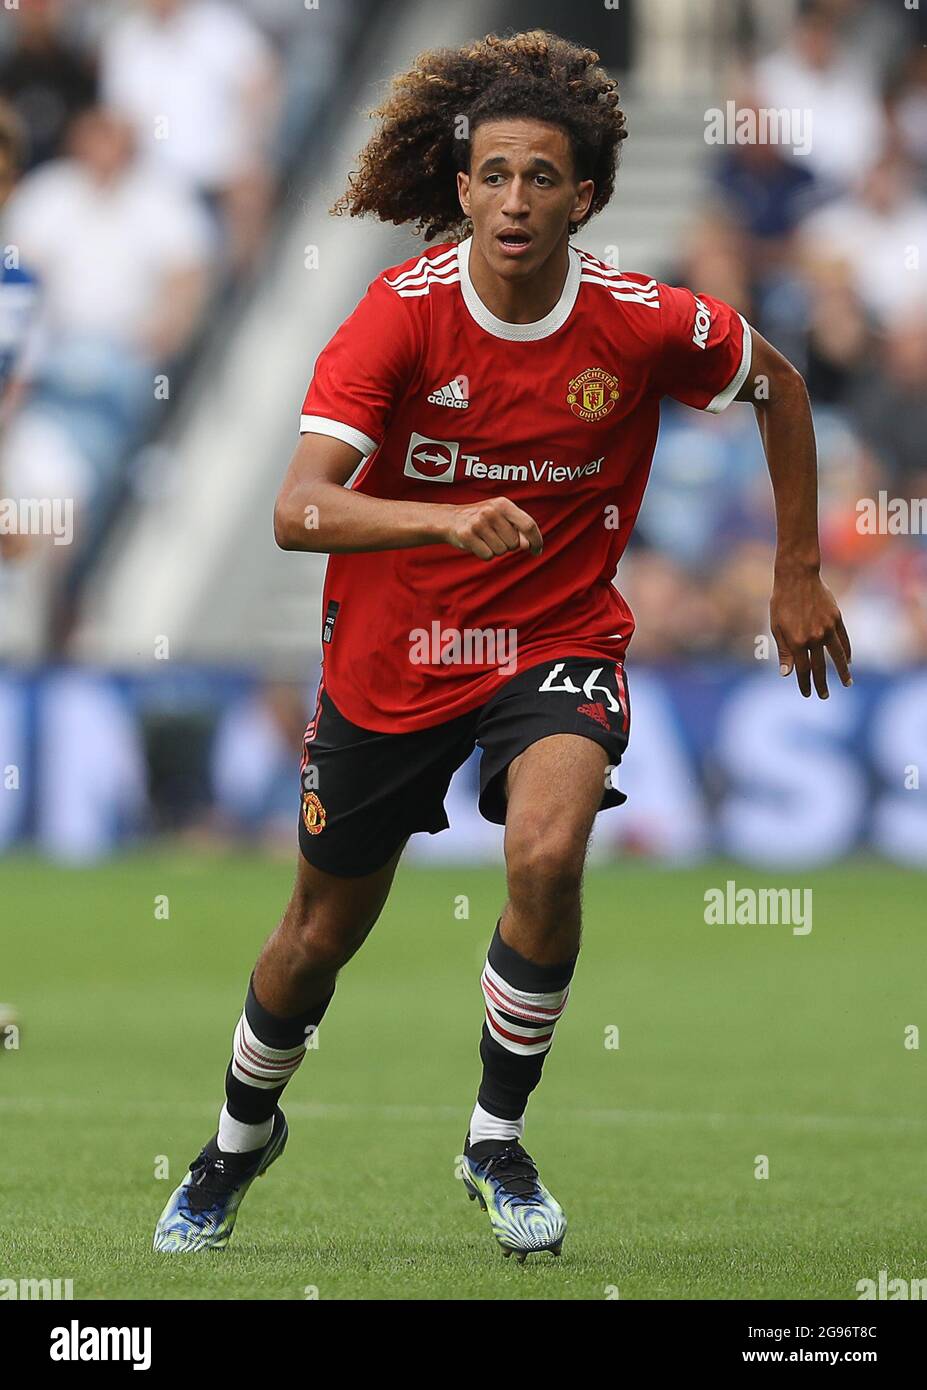 London, England, 24th July 2021. Manchester UnitedÕs Hannibal during the Pre Season Friendly match at The Kiyan Prince Foundation Stadium, London. Picture credit should read: Paul Terry / Sportimage Stock Photo